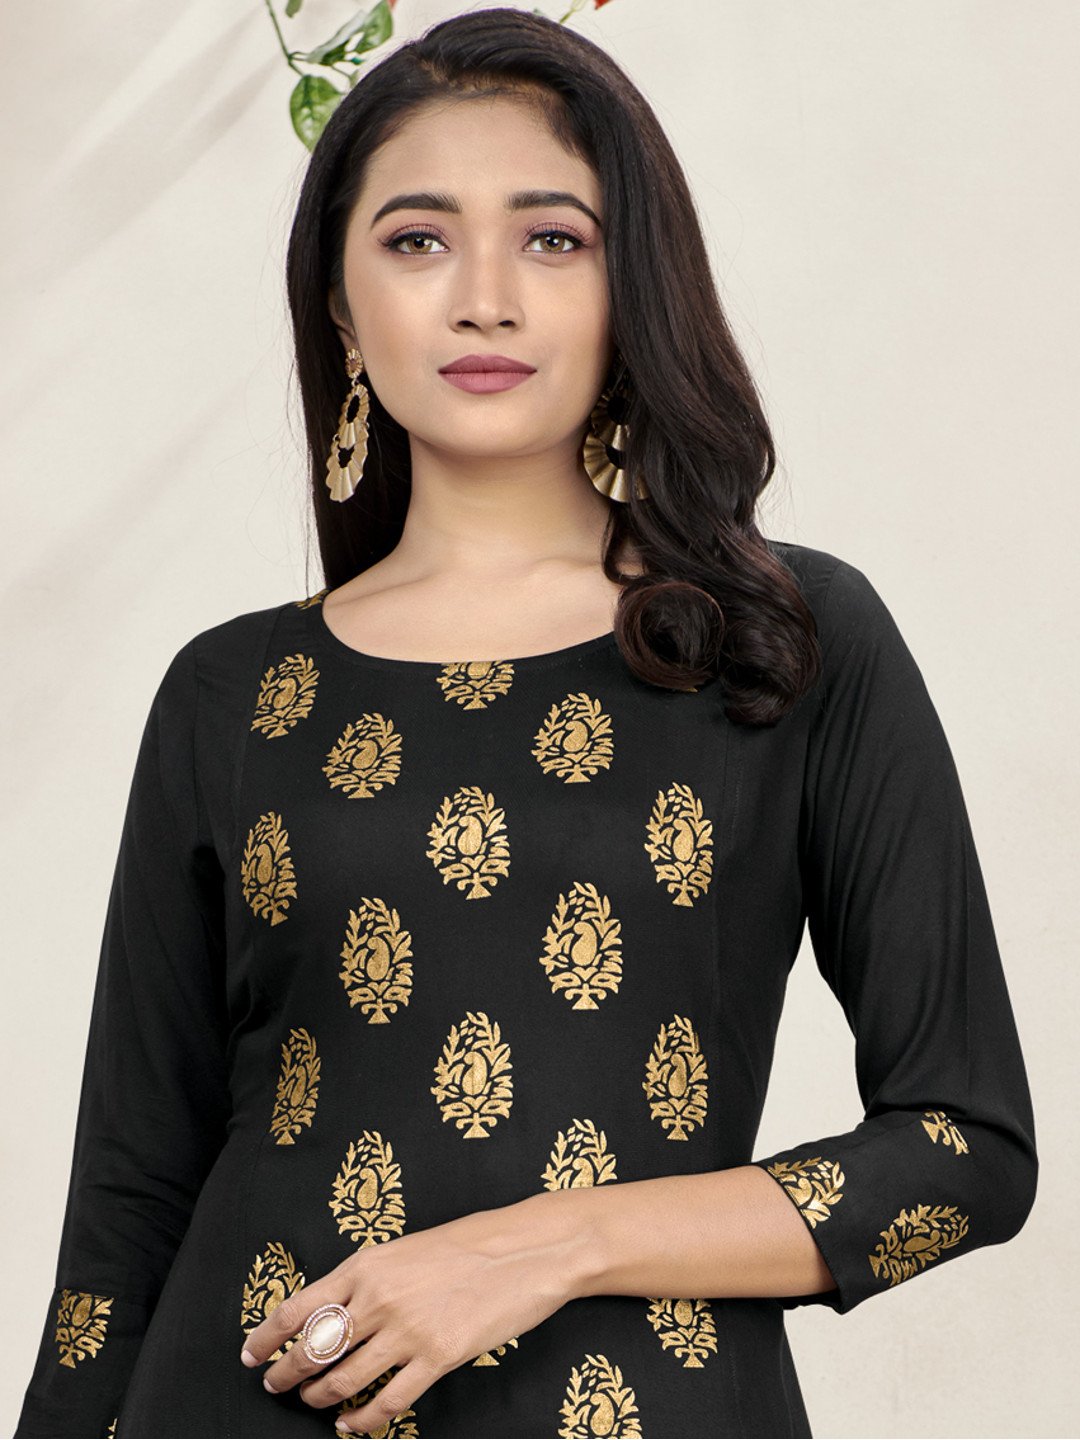 Buy Beige color front panel cut design kurti at Amazon.in